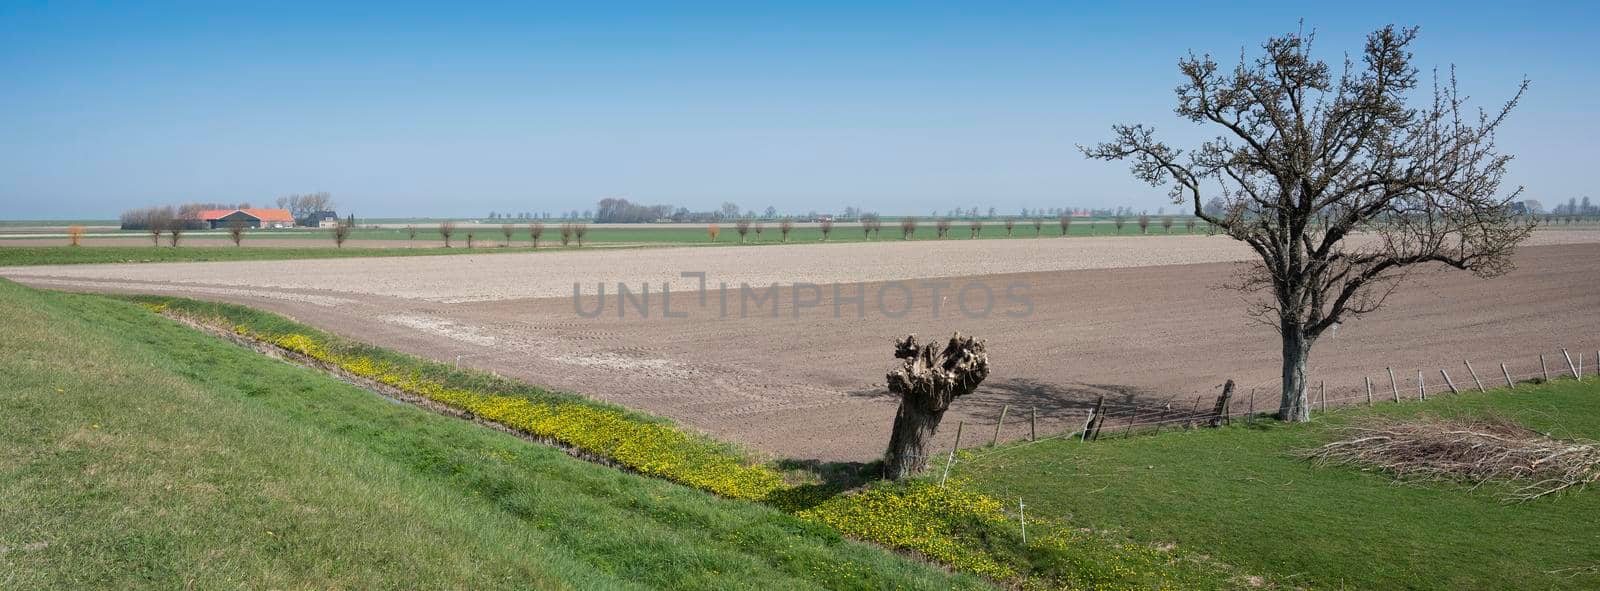 rural countryside of noord beveland in dutch province zeeland on sunny spring day under blue sky in the netherlands